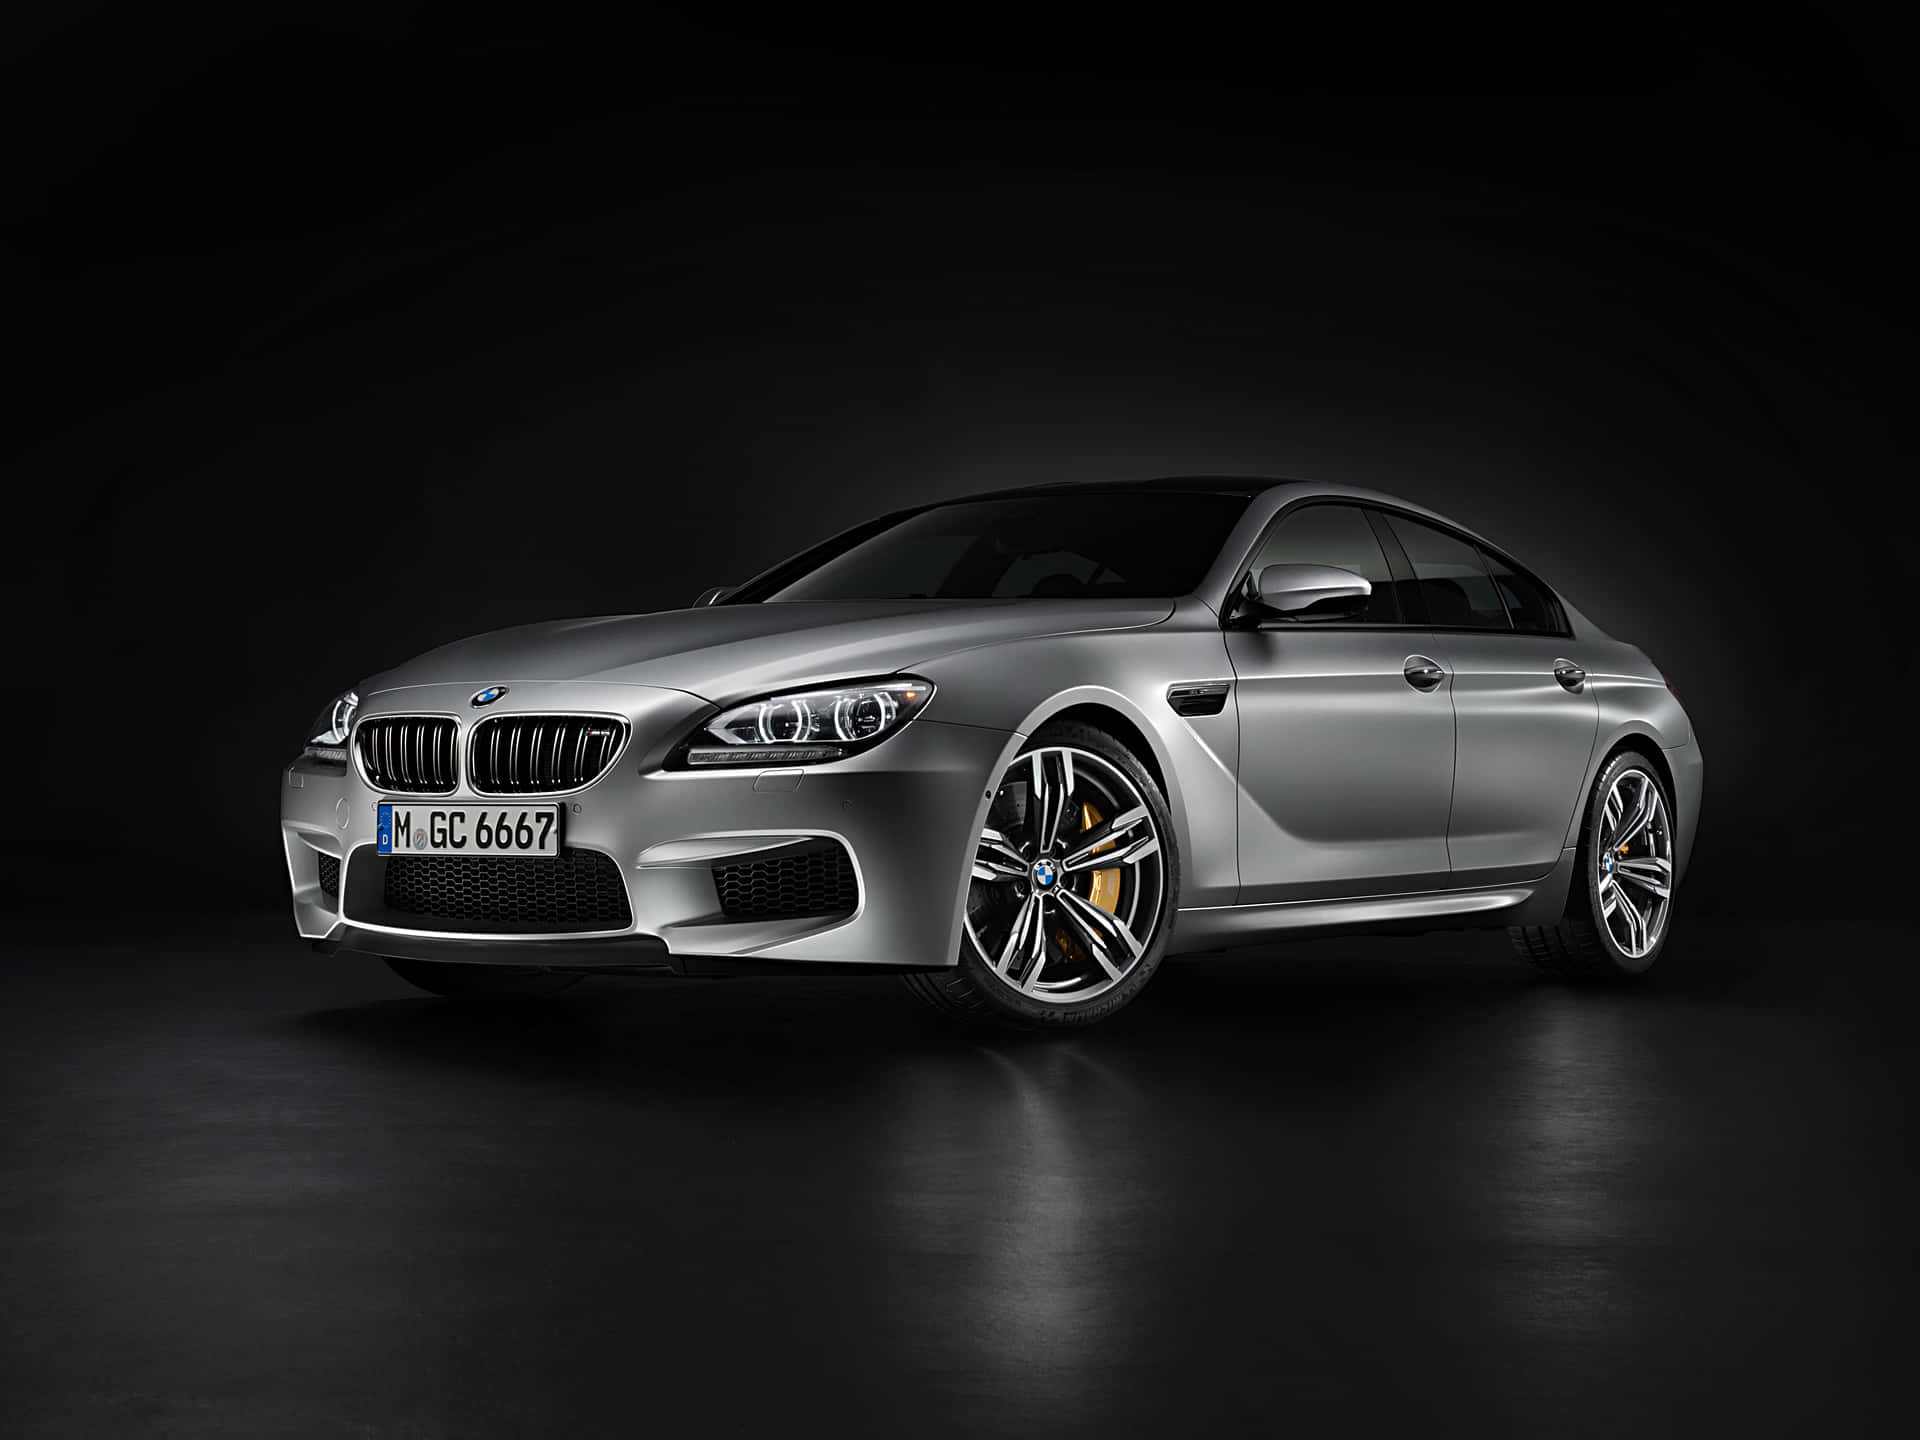 The Powerful and Elegant BMW M6 Wallpaper